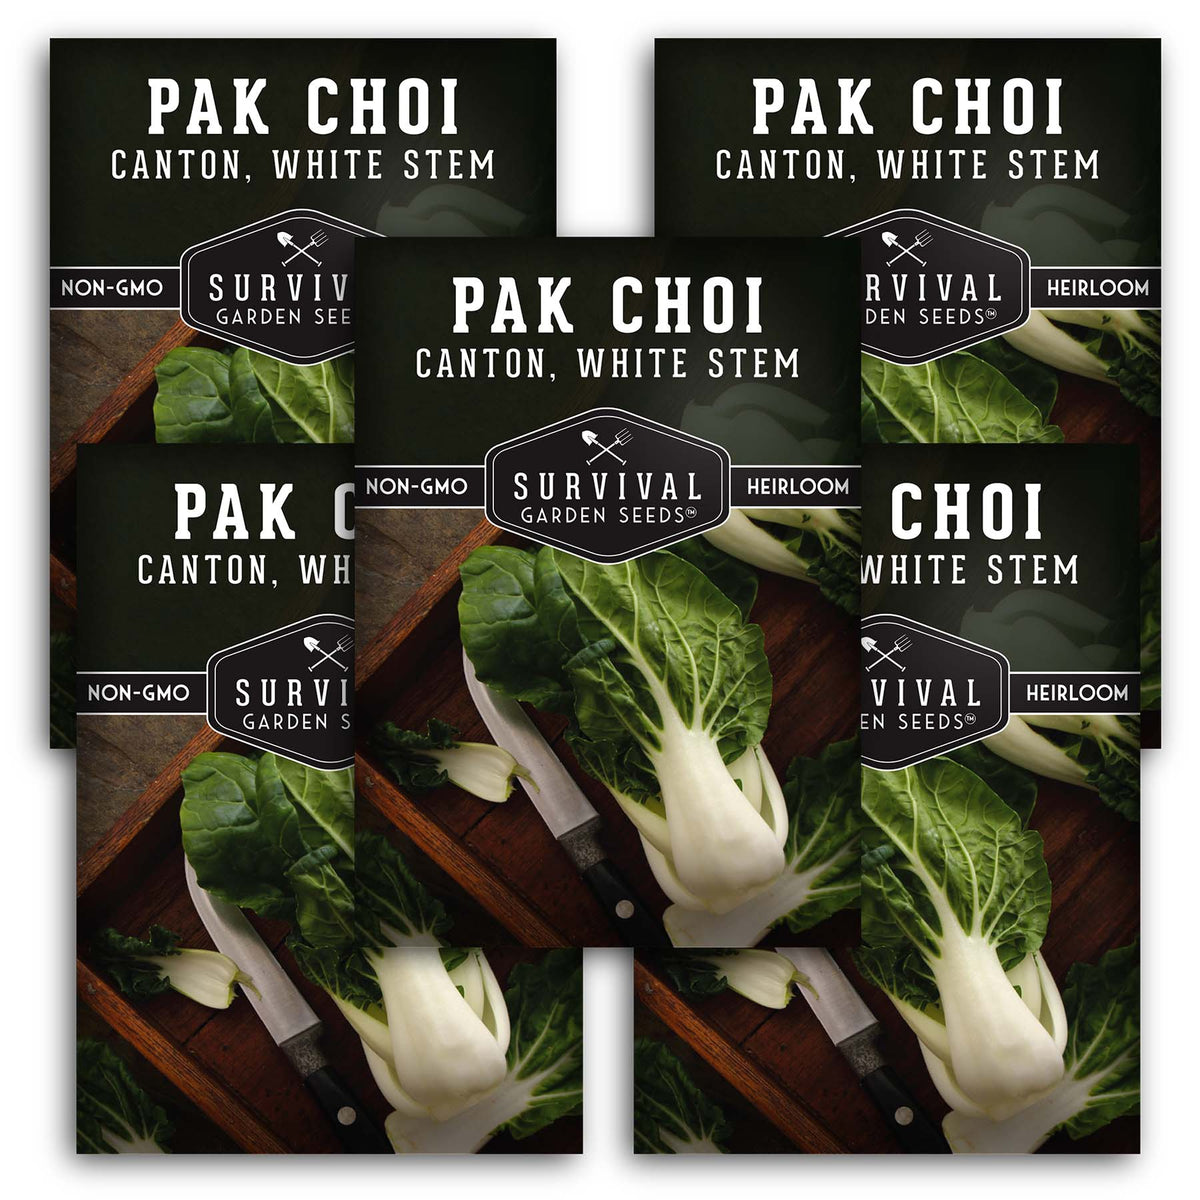 5 packets of Pak choi seeds